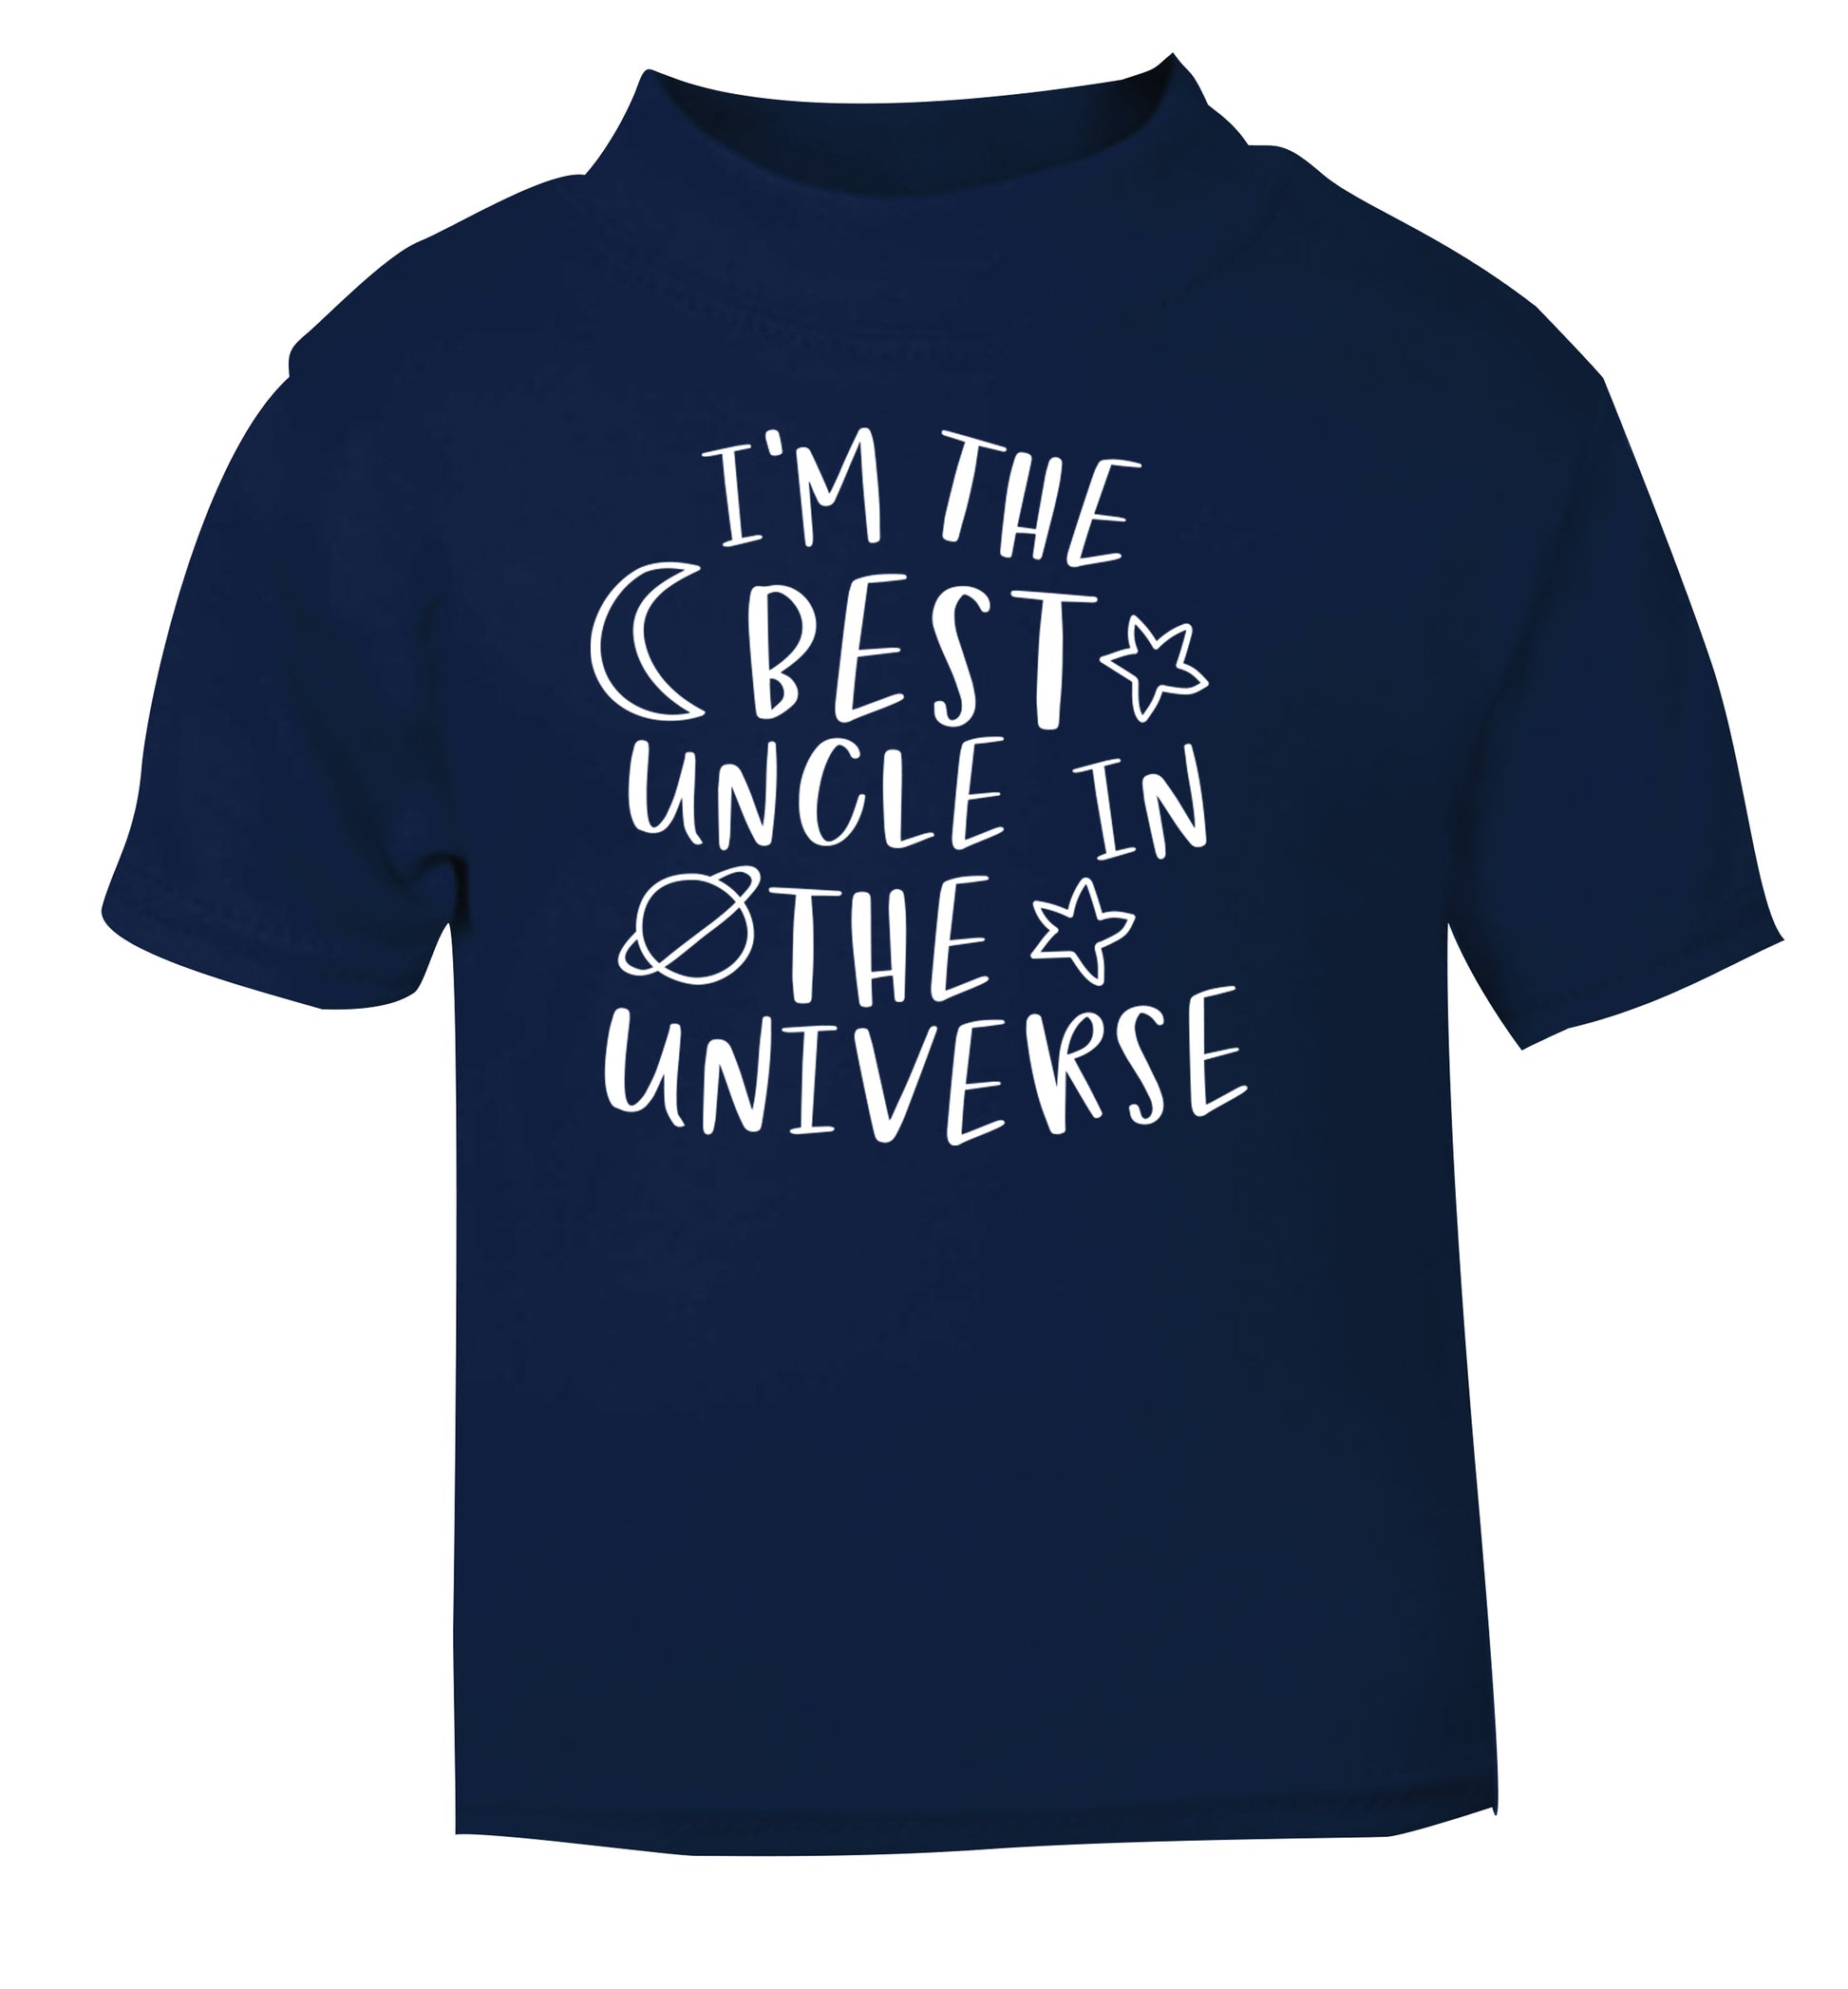 I'm the best uncle in the universe navy Baby Toddler Tshirt 2 Years